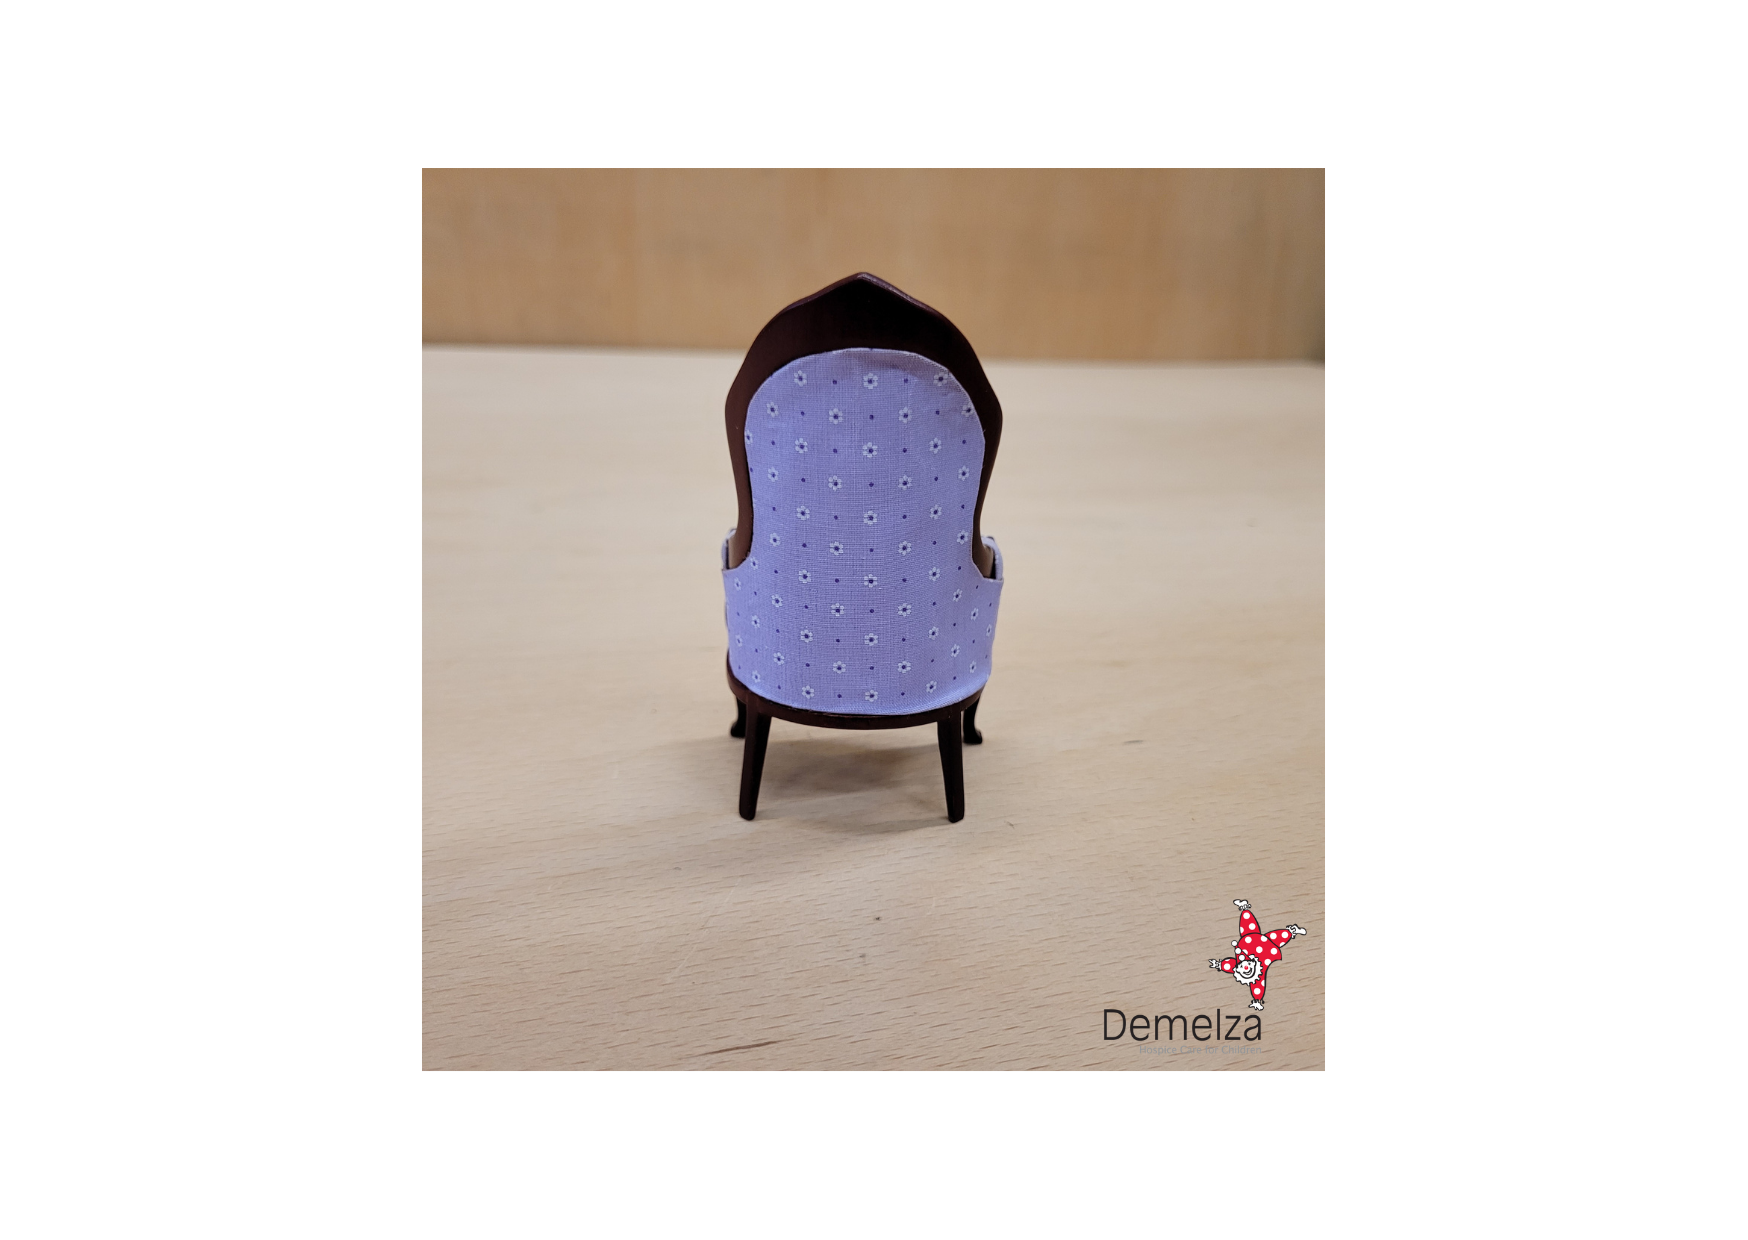 Dolls House 1:12 Scale Mahogany Chair Rear View